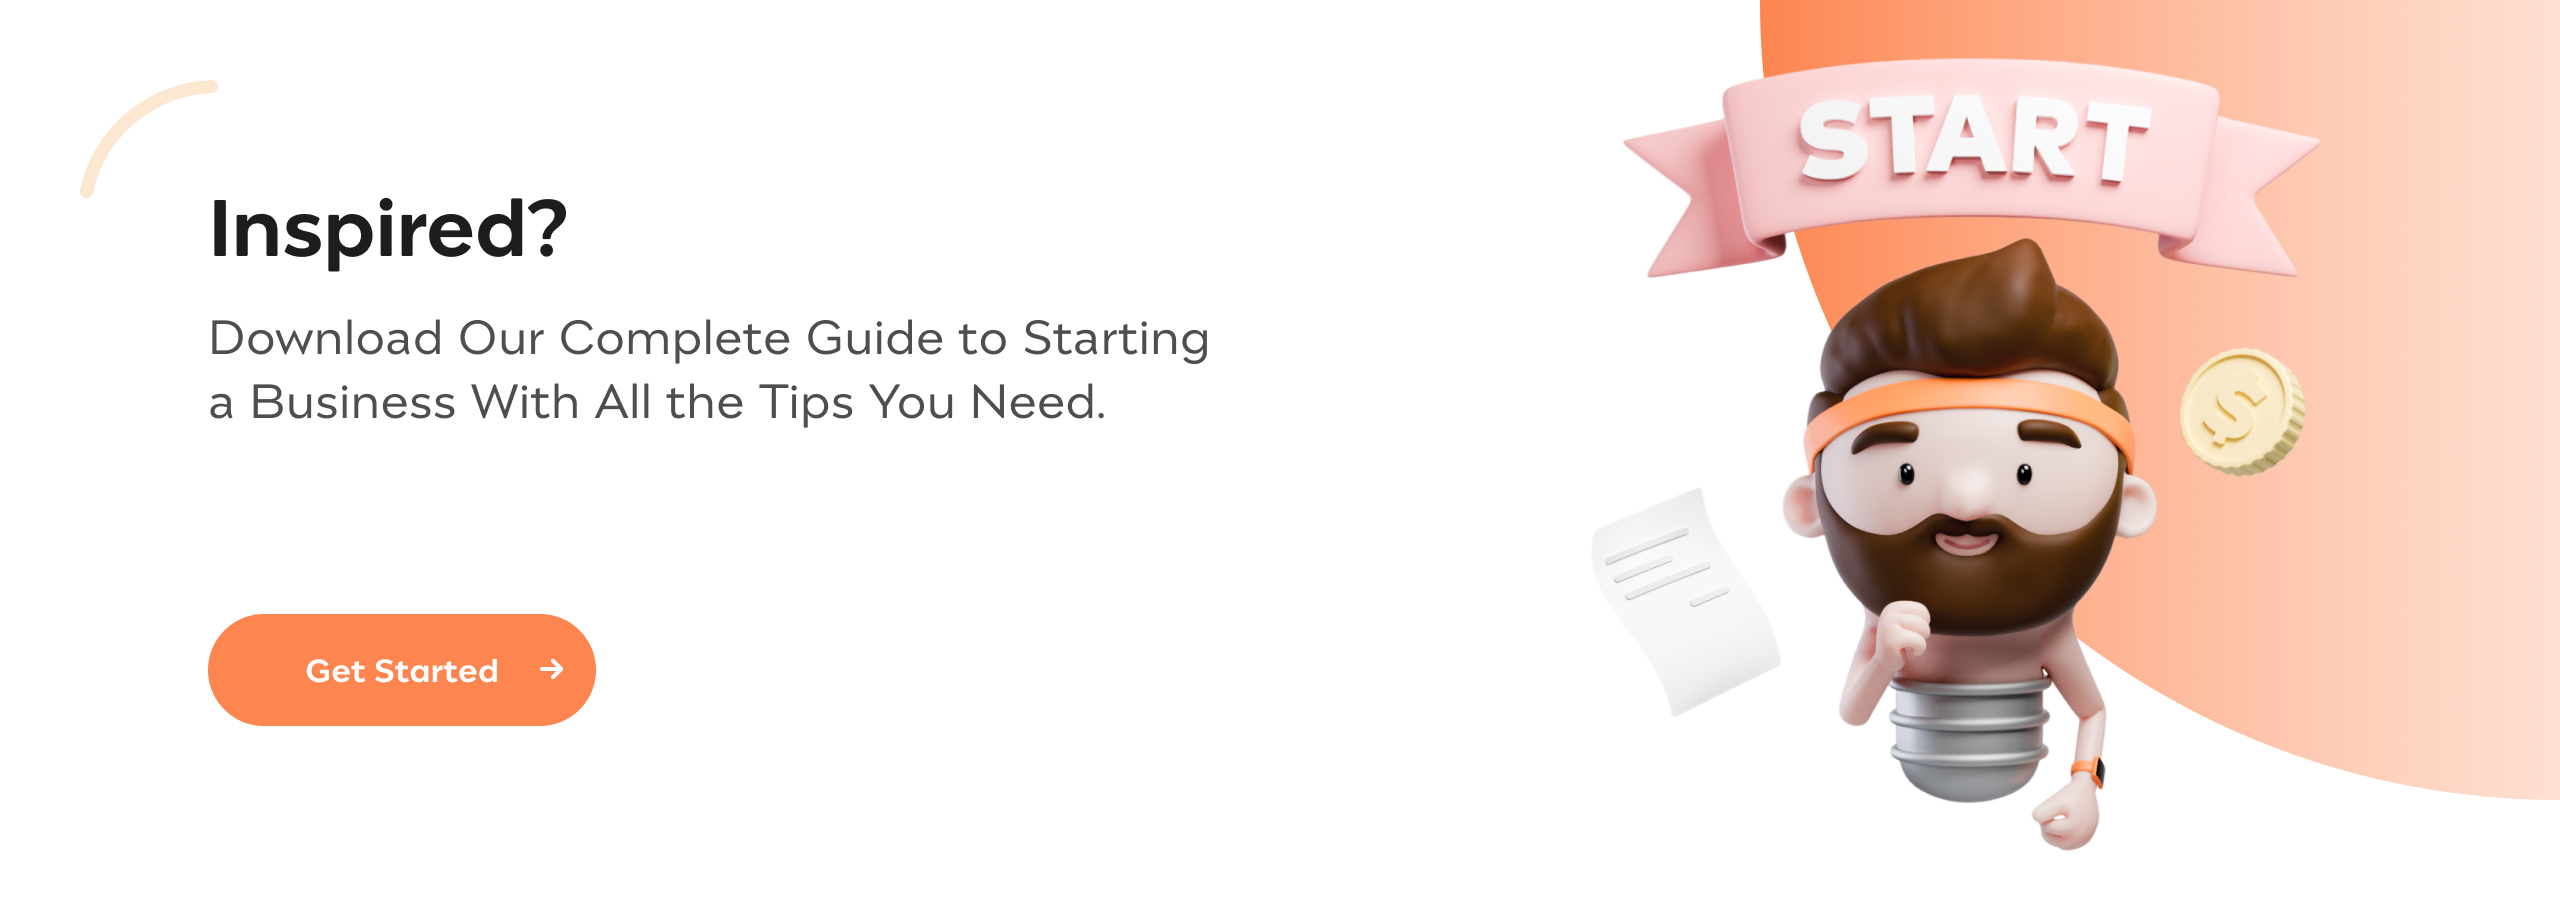 Inspired? Download Our Complete Guide to Starting a Business With All the Tips You Need.